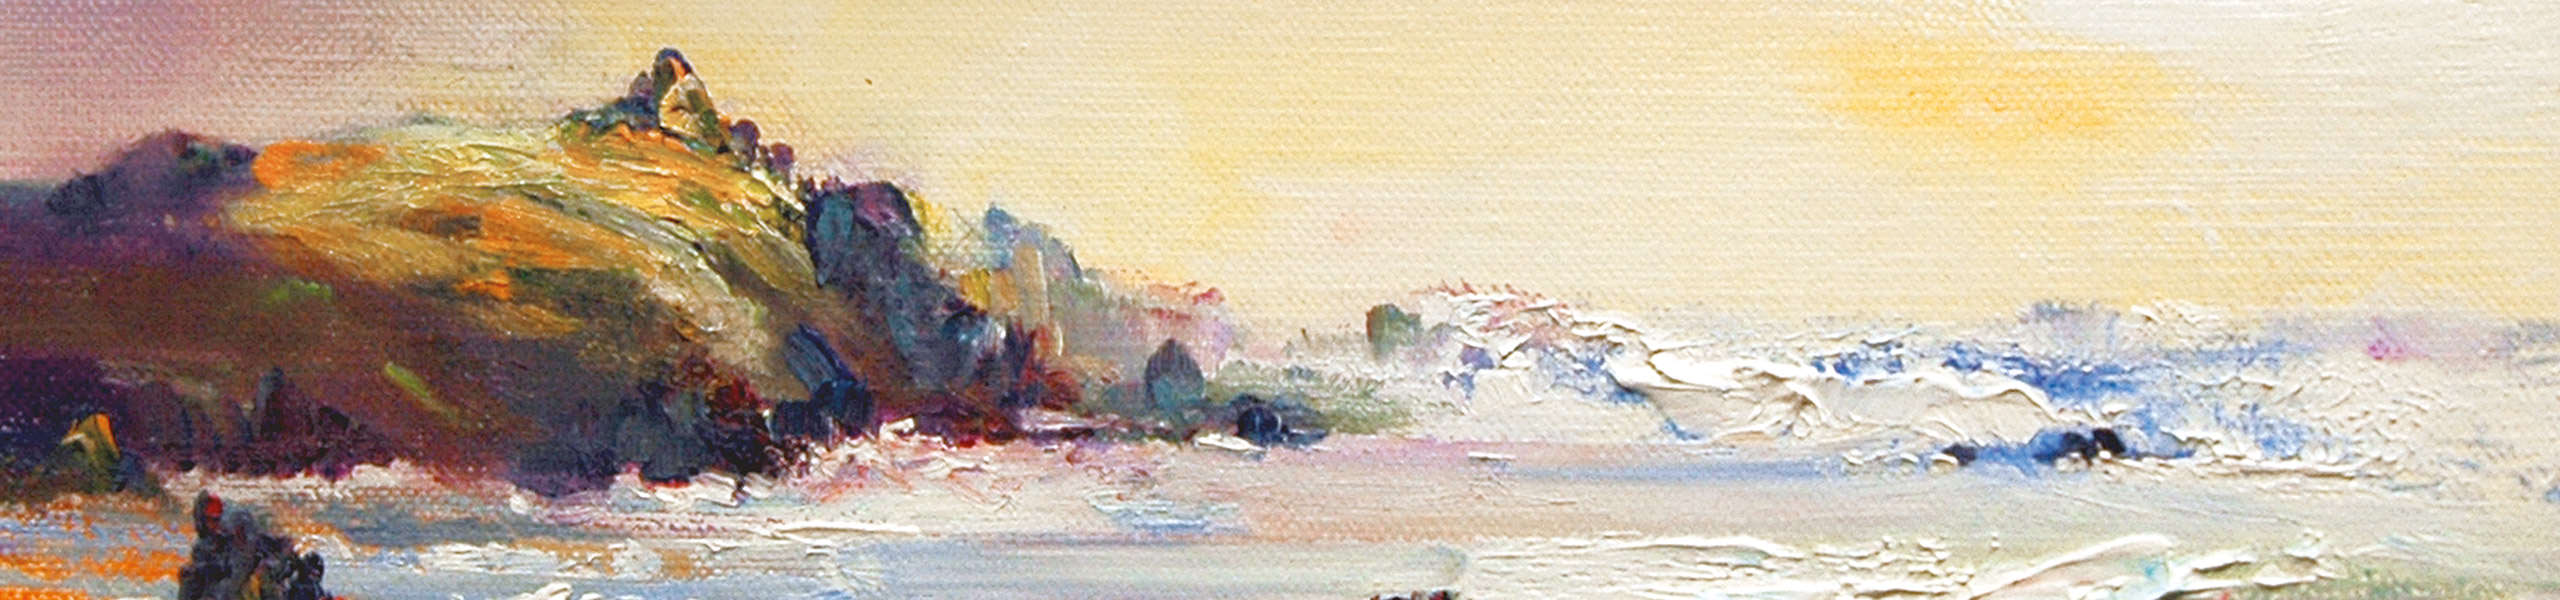 crop of landscape painting by Vega